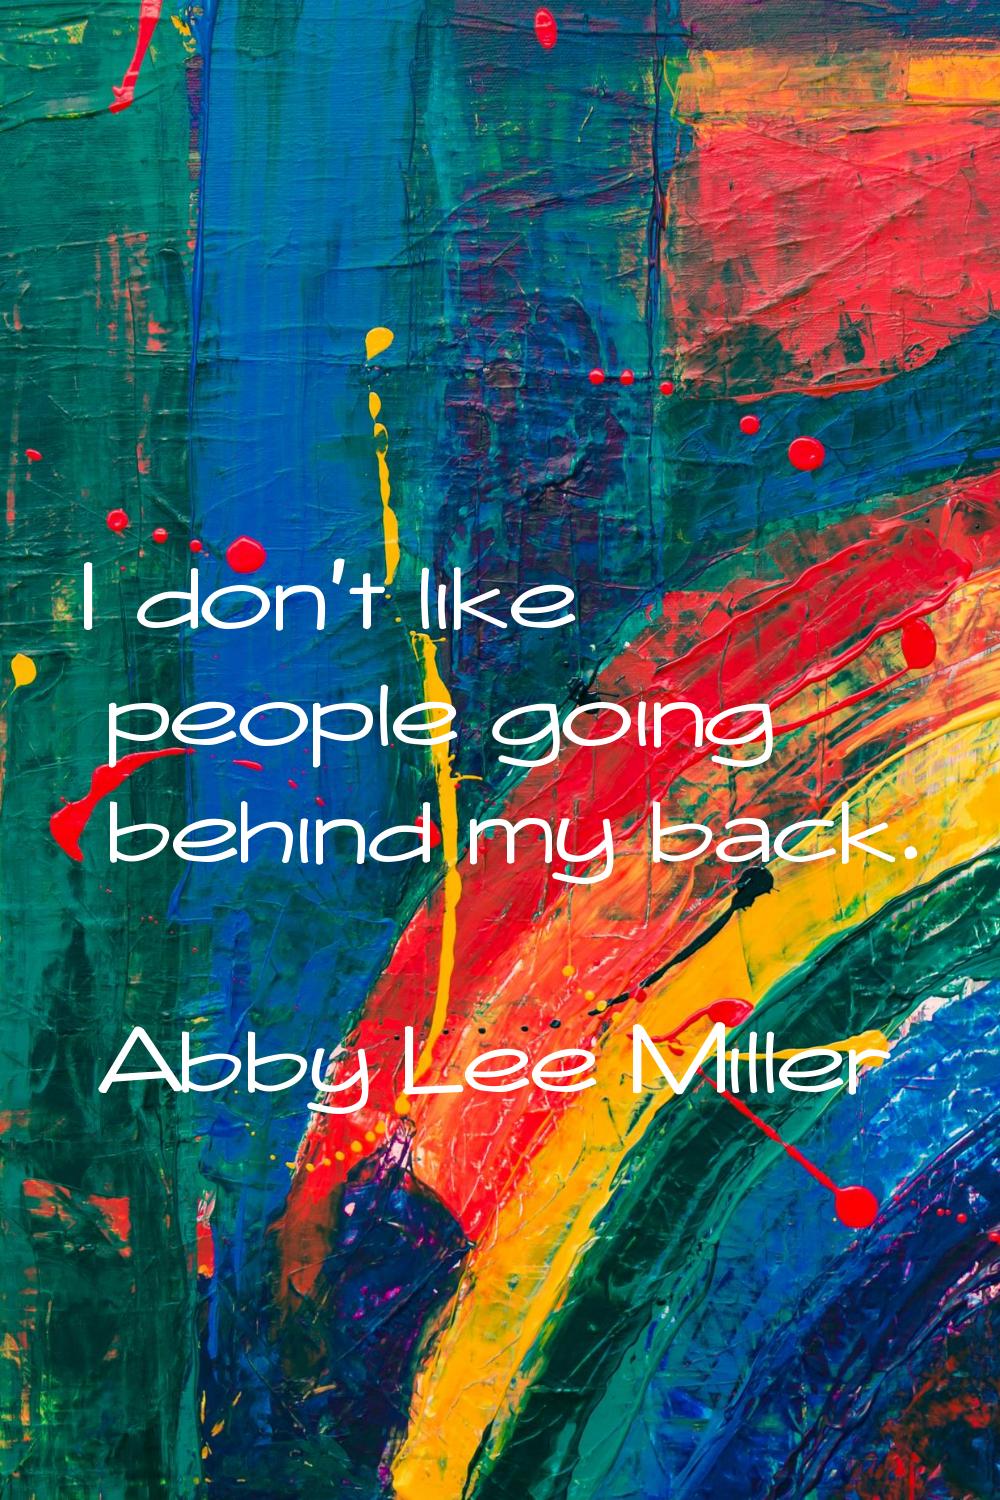 I don't like people going behind my back.